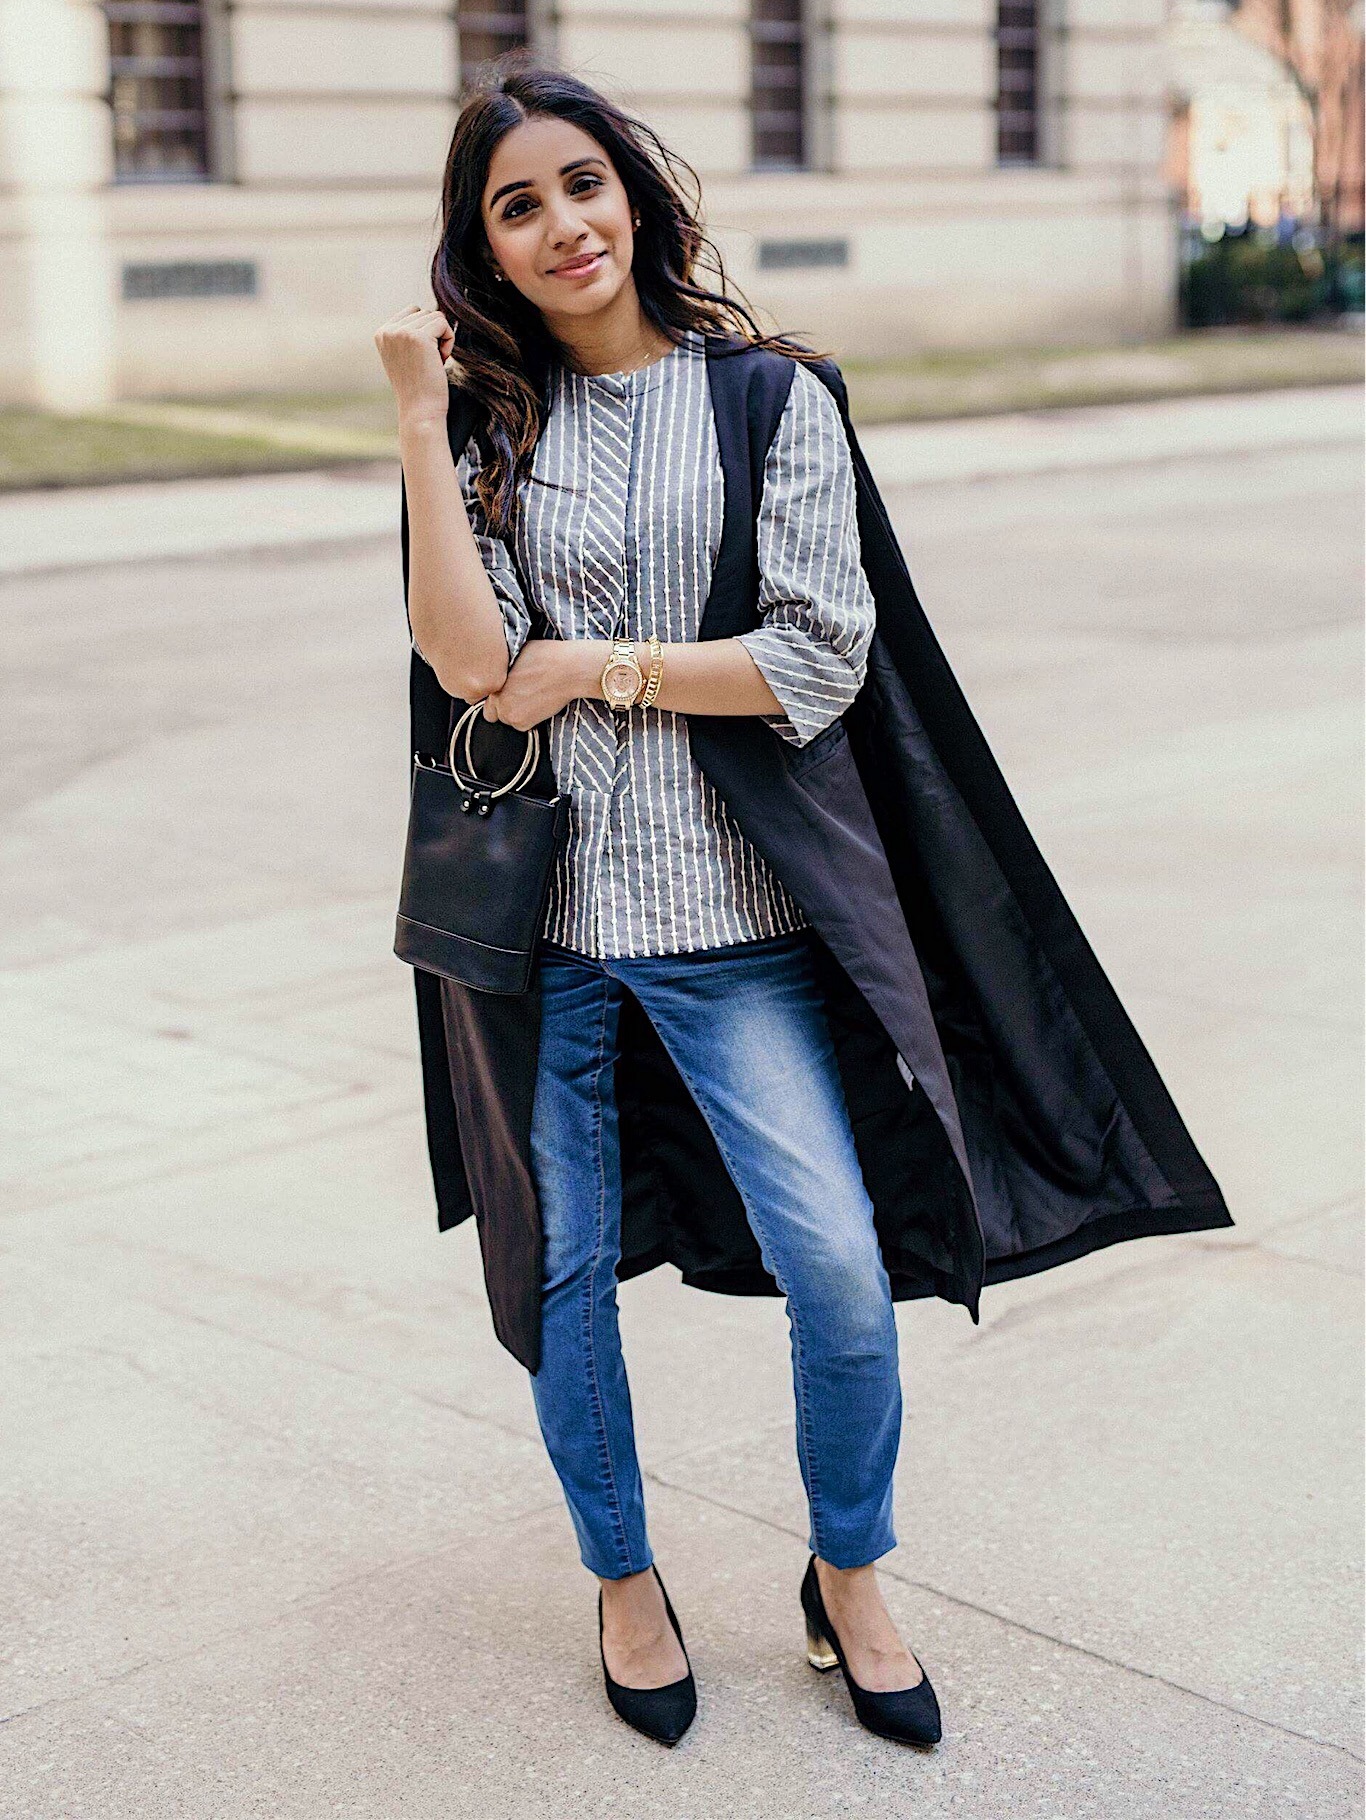 SincerelyHumble Faiza Inam OOTD Fashion style icon trench coat shein express crossbag pregnancy style cape coat style